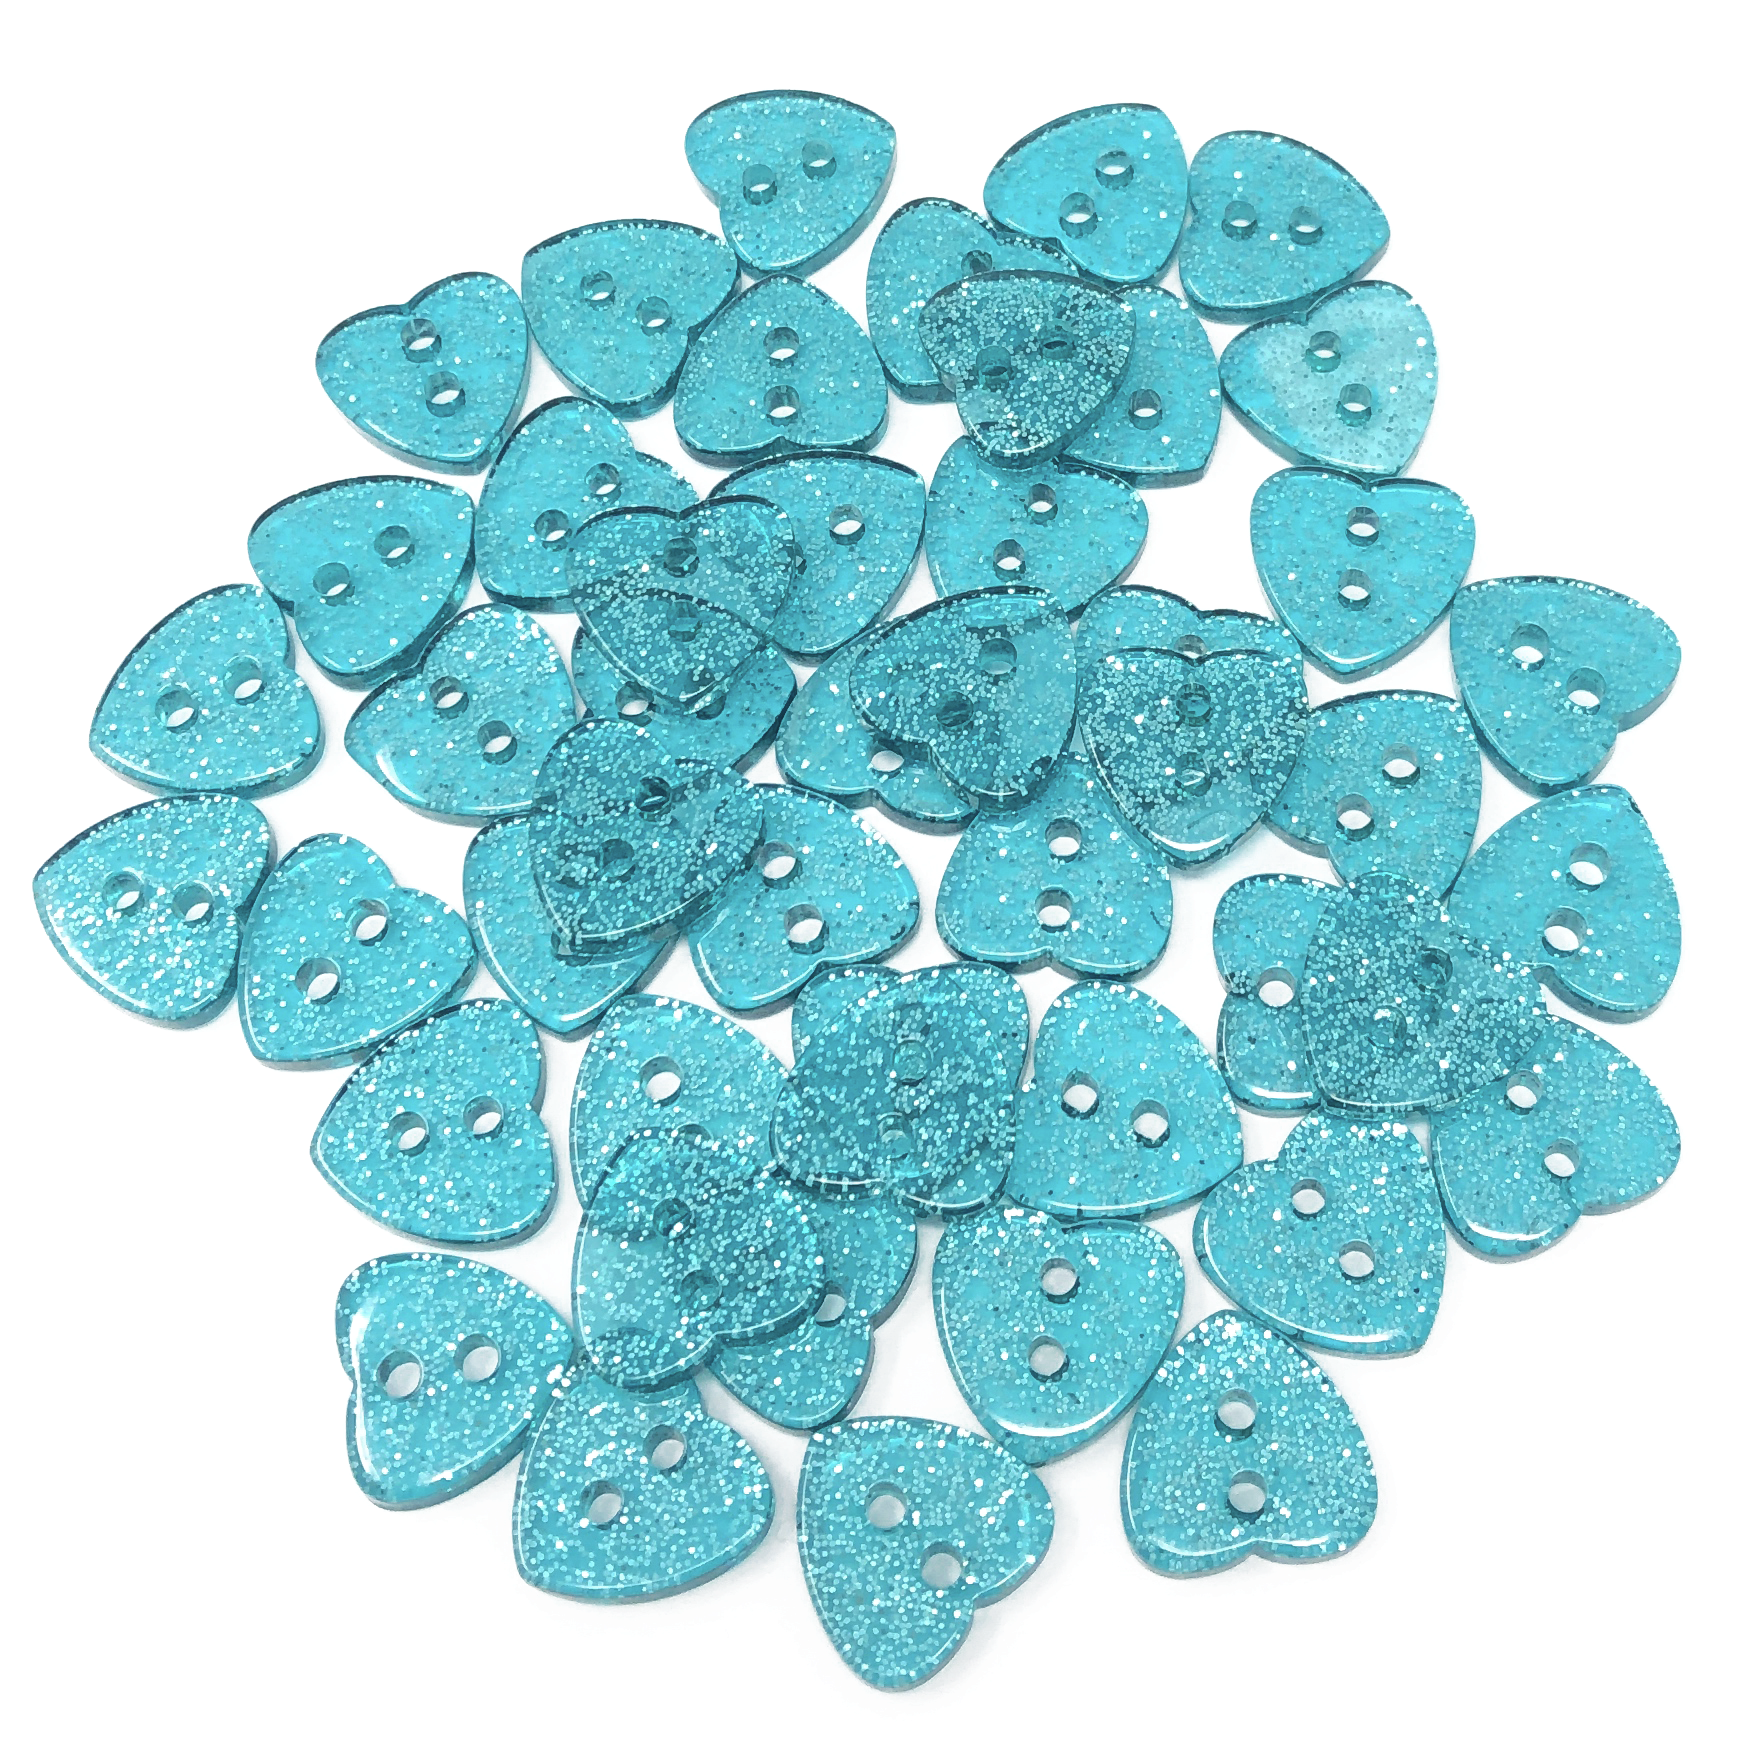 Turquoise 50 Mix Glitter Heart 13mm Resin Buttons